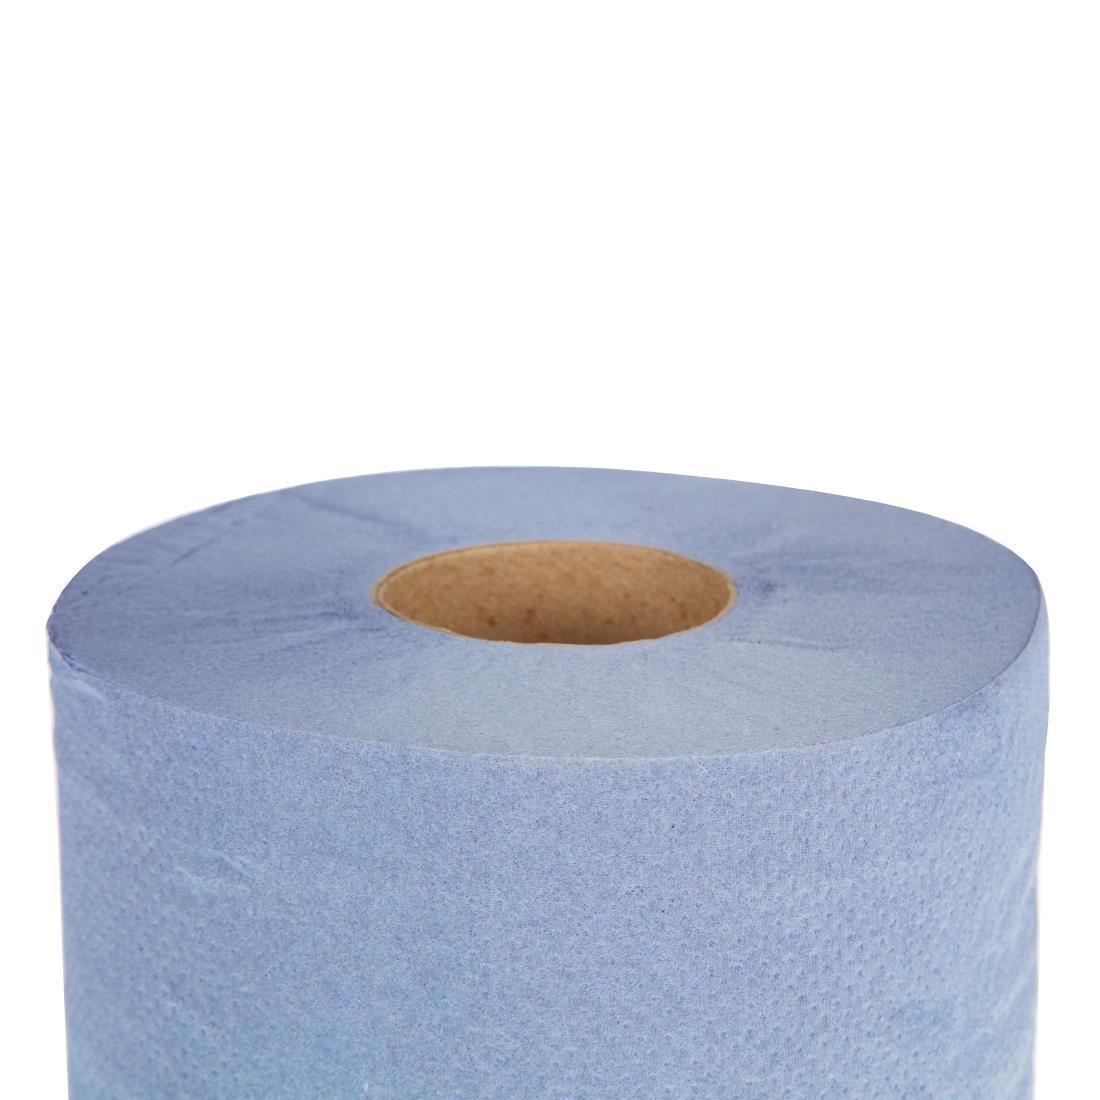 Jantex Centrefeed Blue Rolls 2-Ply 120m (Pack of 6) - DL921  - 3